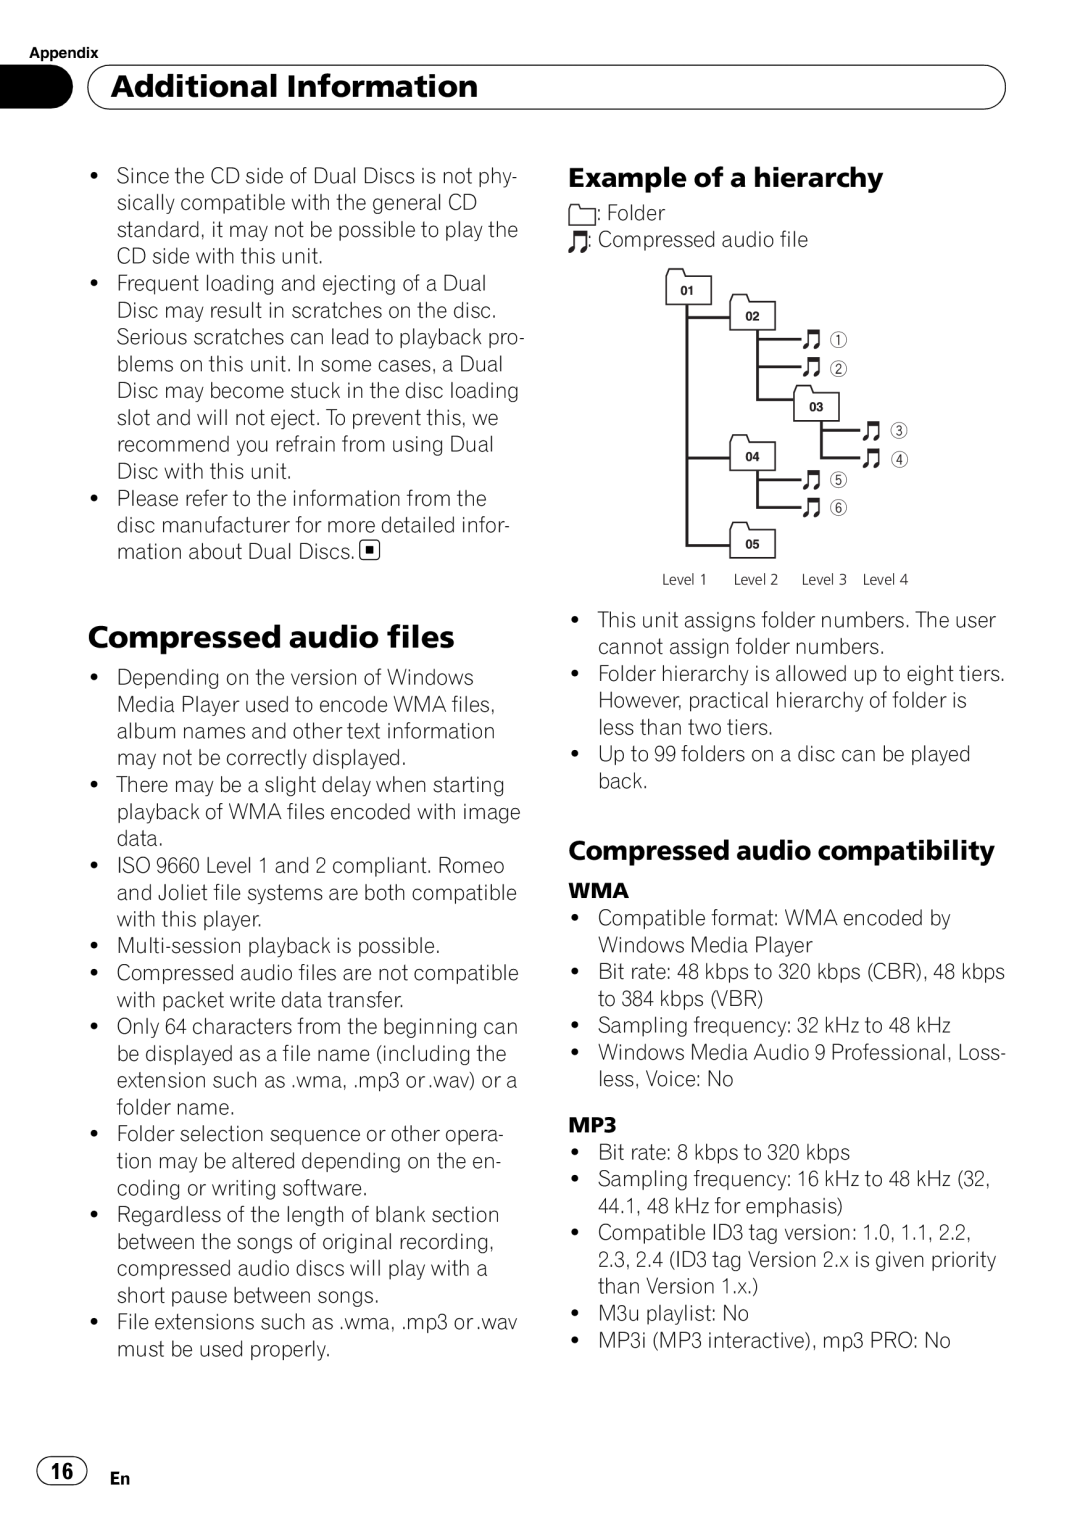 Pioneer DEH-3000MP Compressed audio files, Example of a hierarchy, Compressed audio compatibility, Additional Information 